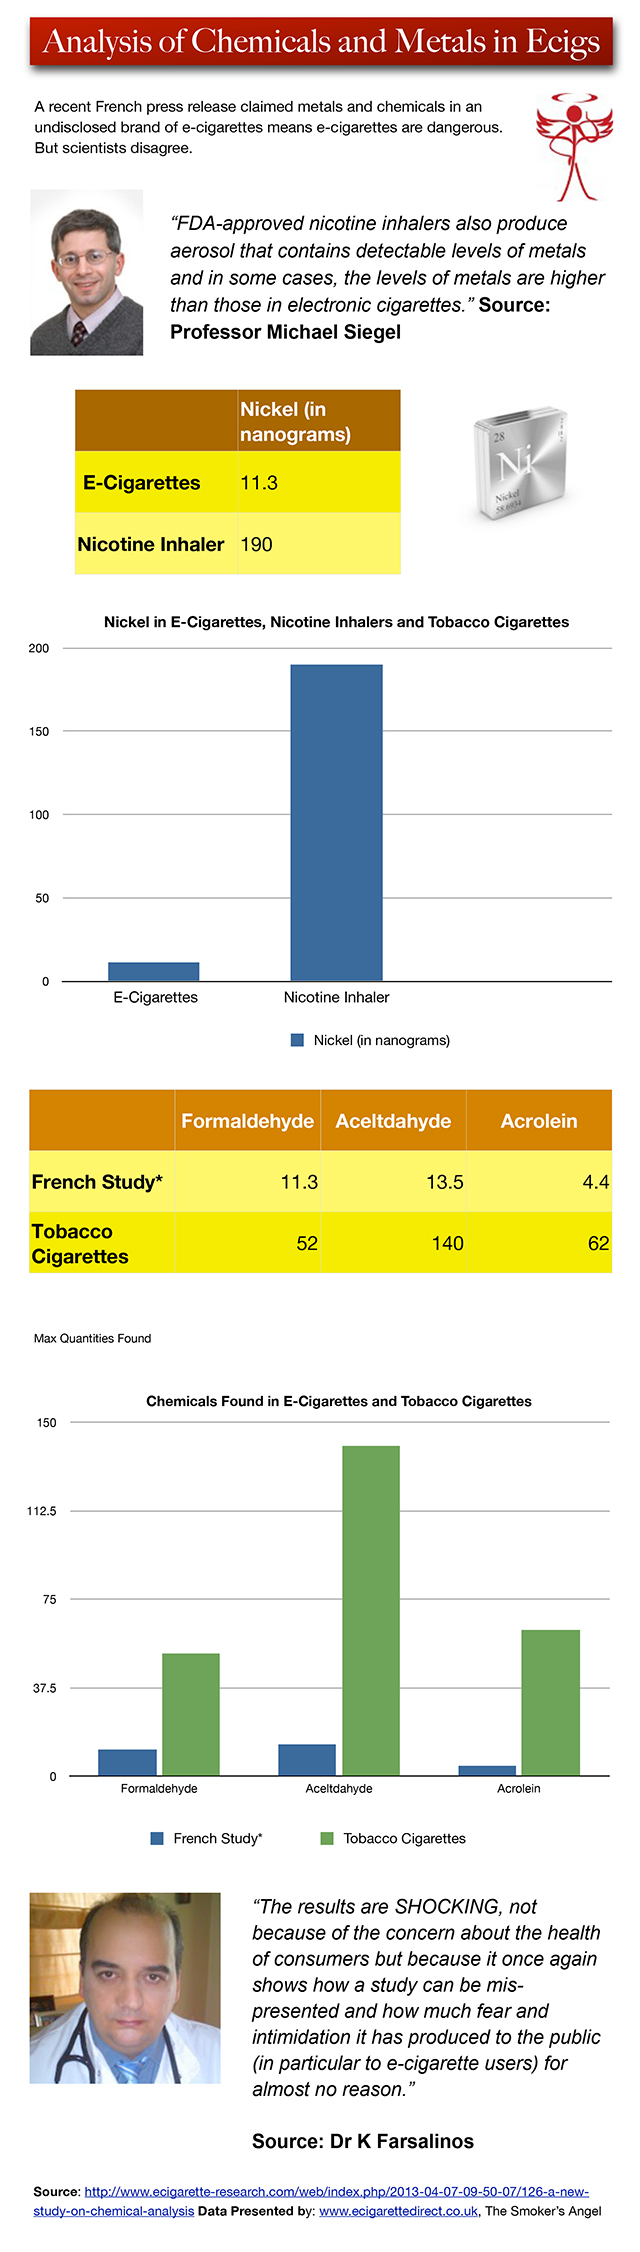 Comparison of chemicals in electronic cigarettes, nicotine inhalers and tobacco cigarettes. 